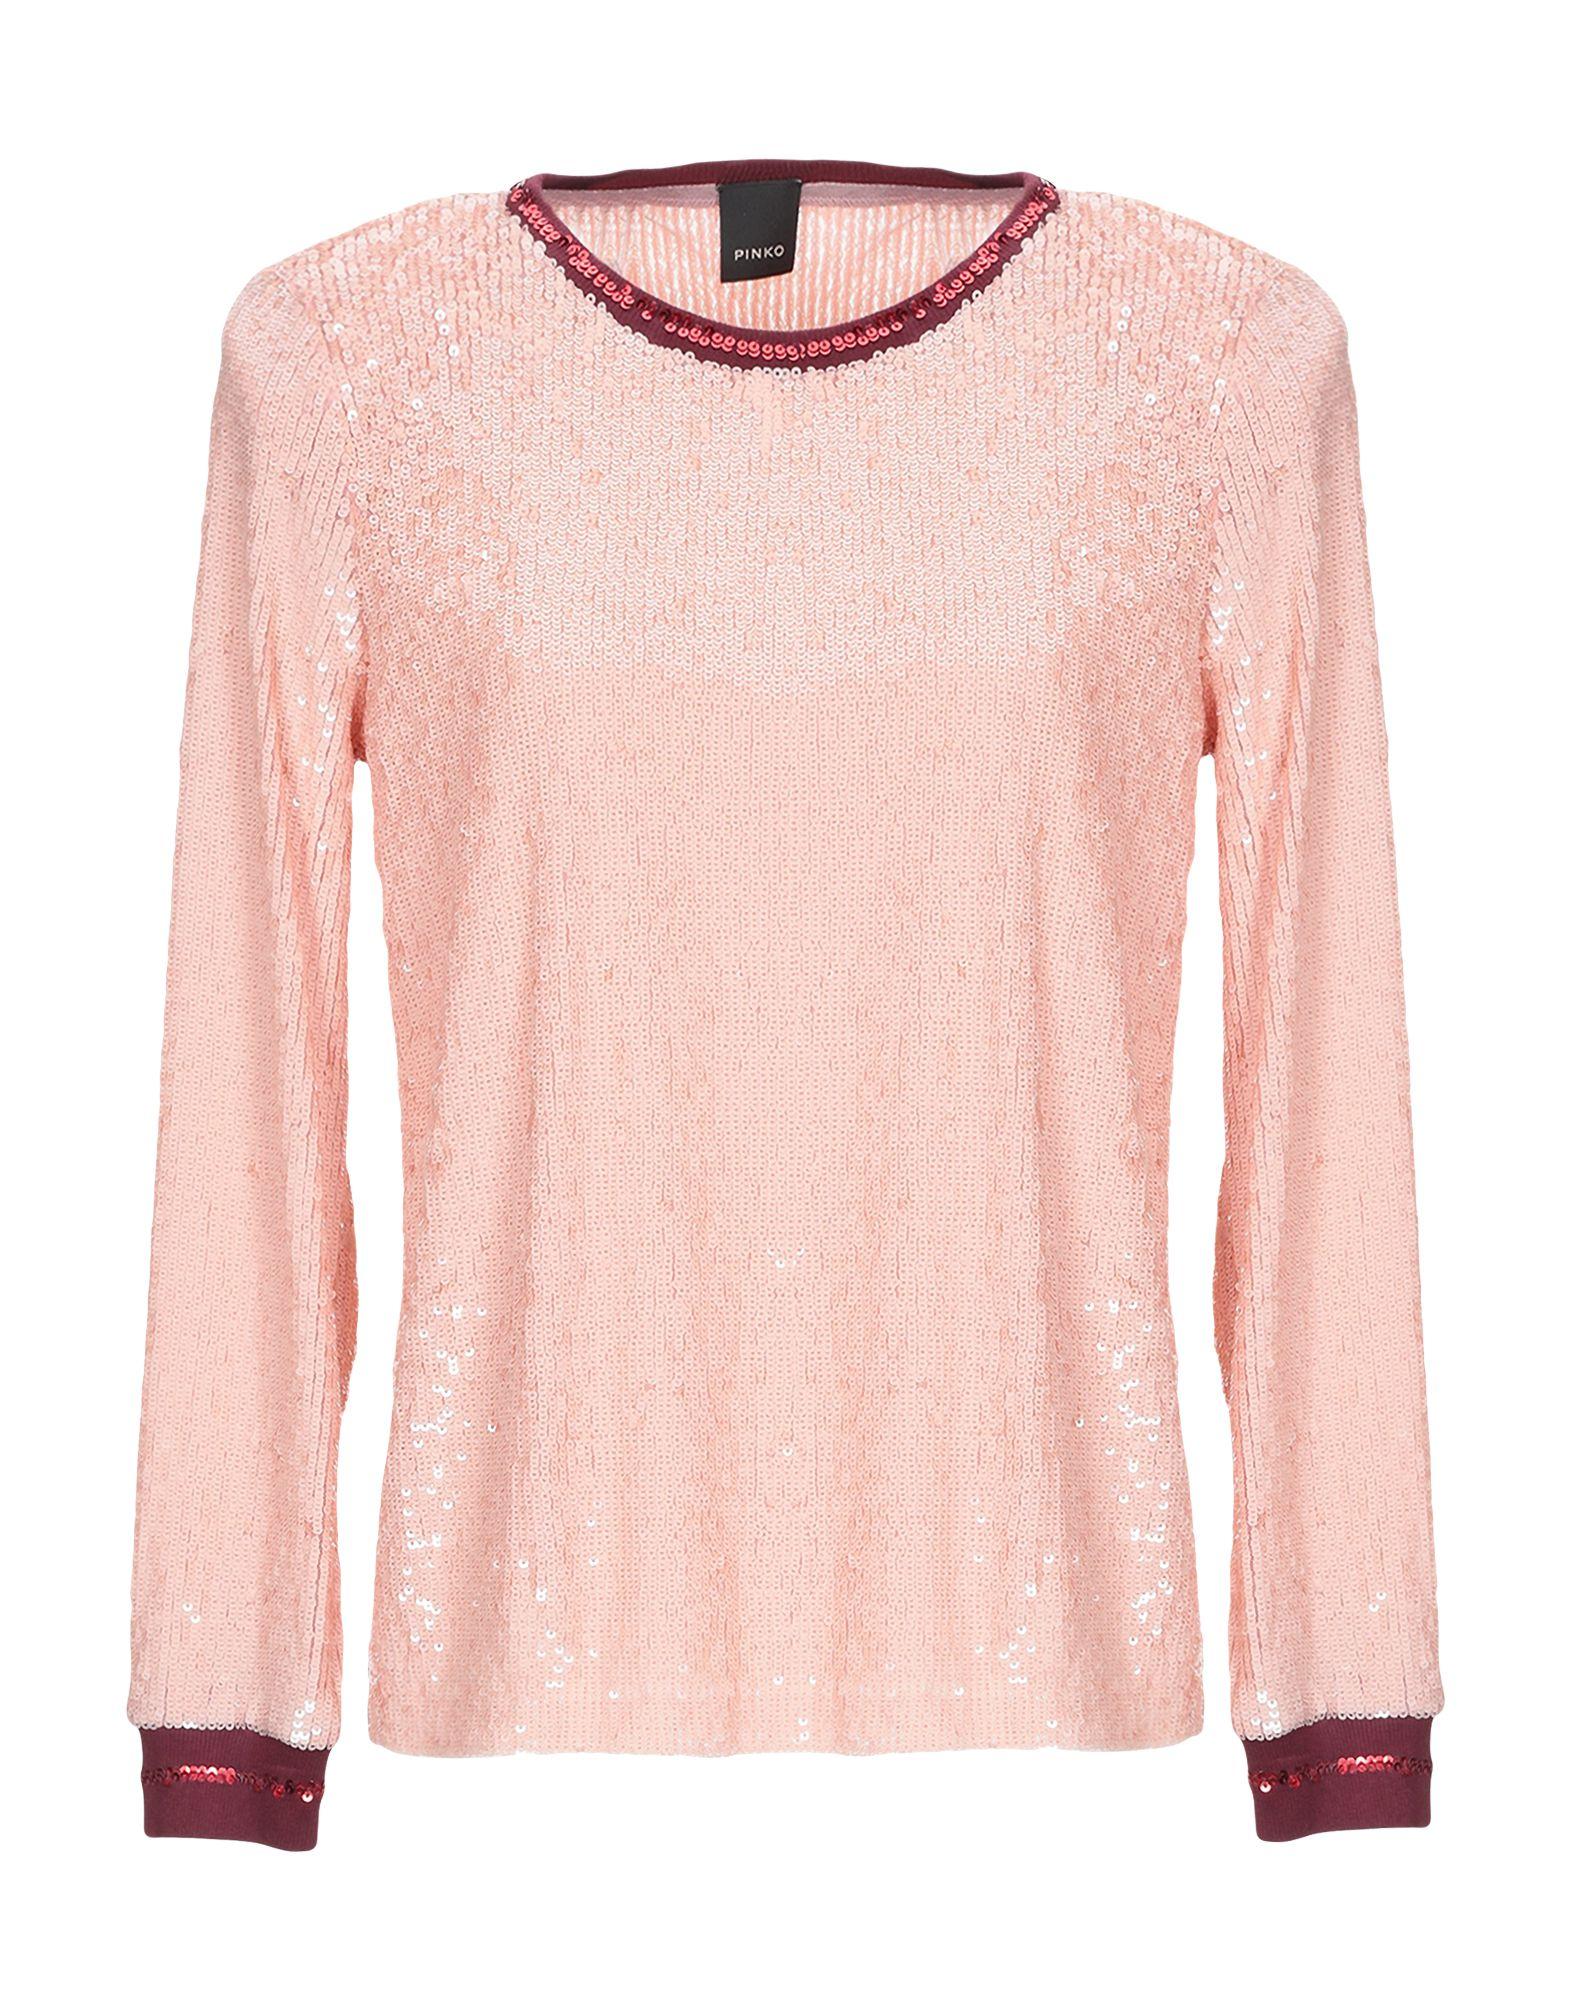 Pinko Tulle Blouse in Light Pink (Pink) - Lyst